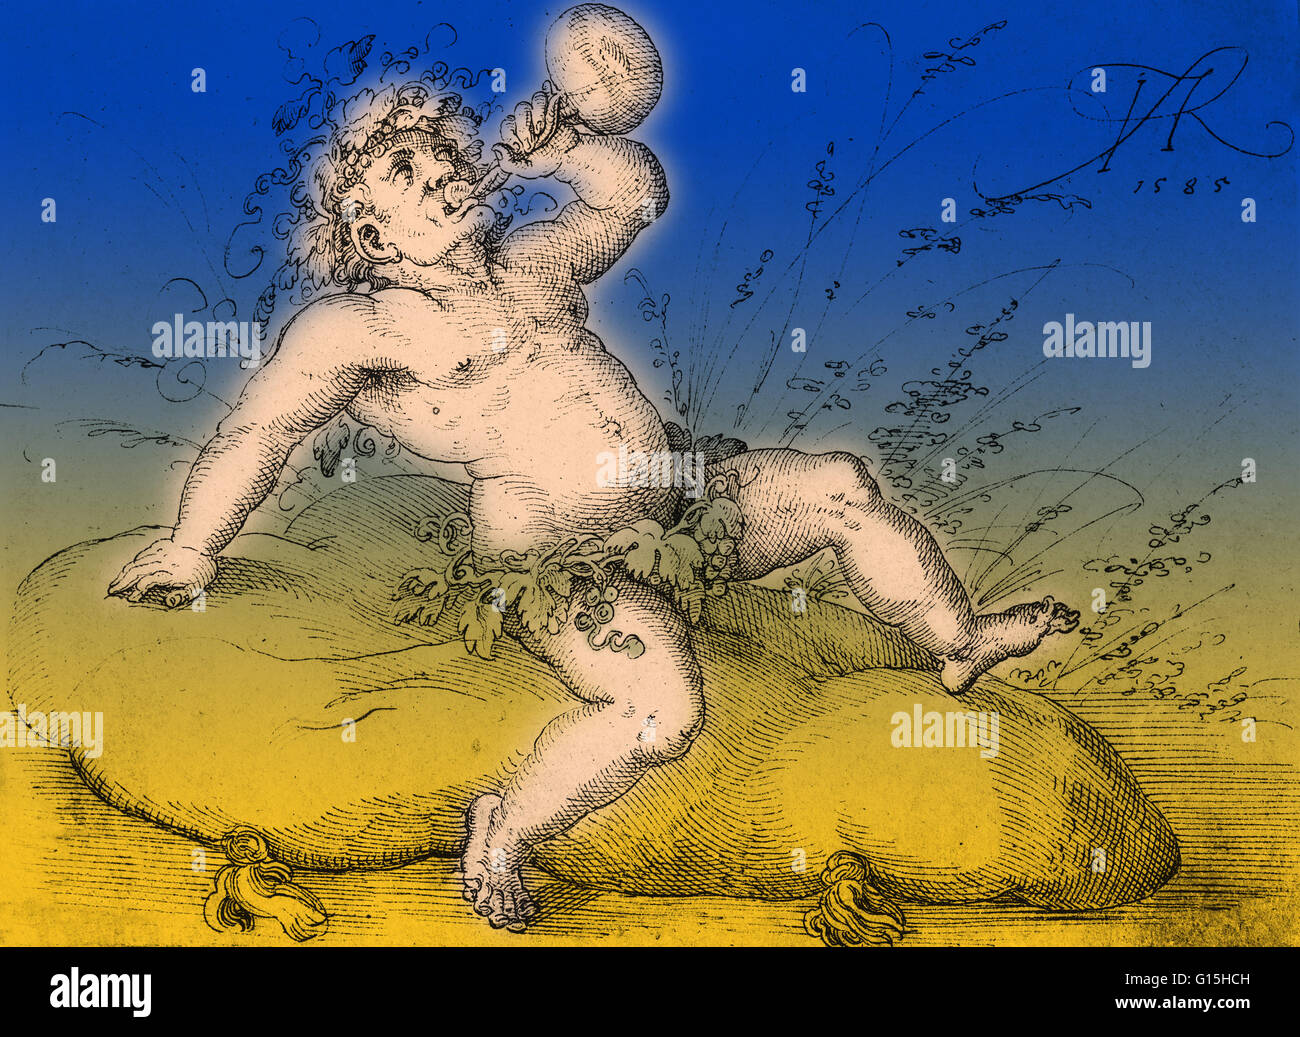 Dionysus, in Greek mythology the god of the grape harvest, winemaking and wine, of ritual madness and ecstasy. He was also known as Bacchus by the Romans. Artwork by Jost Amman. Stock Photo